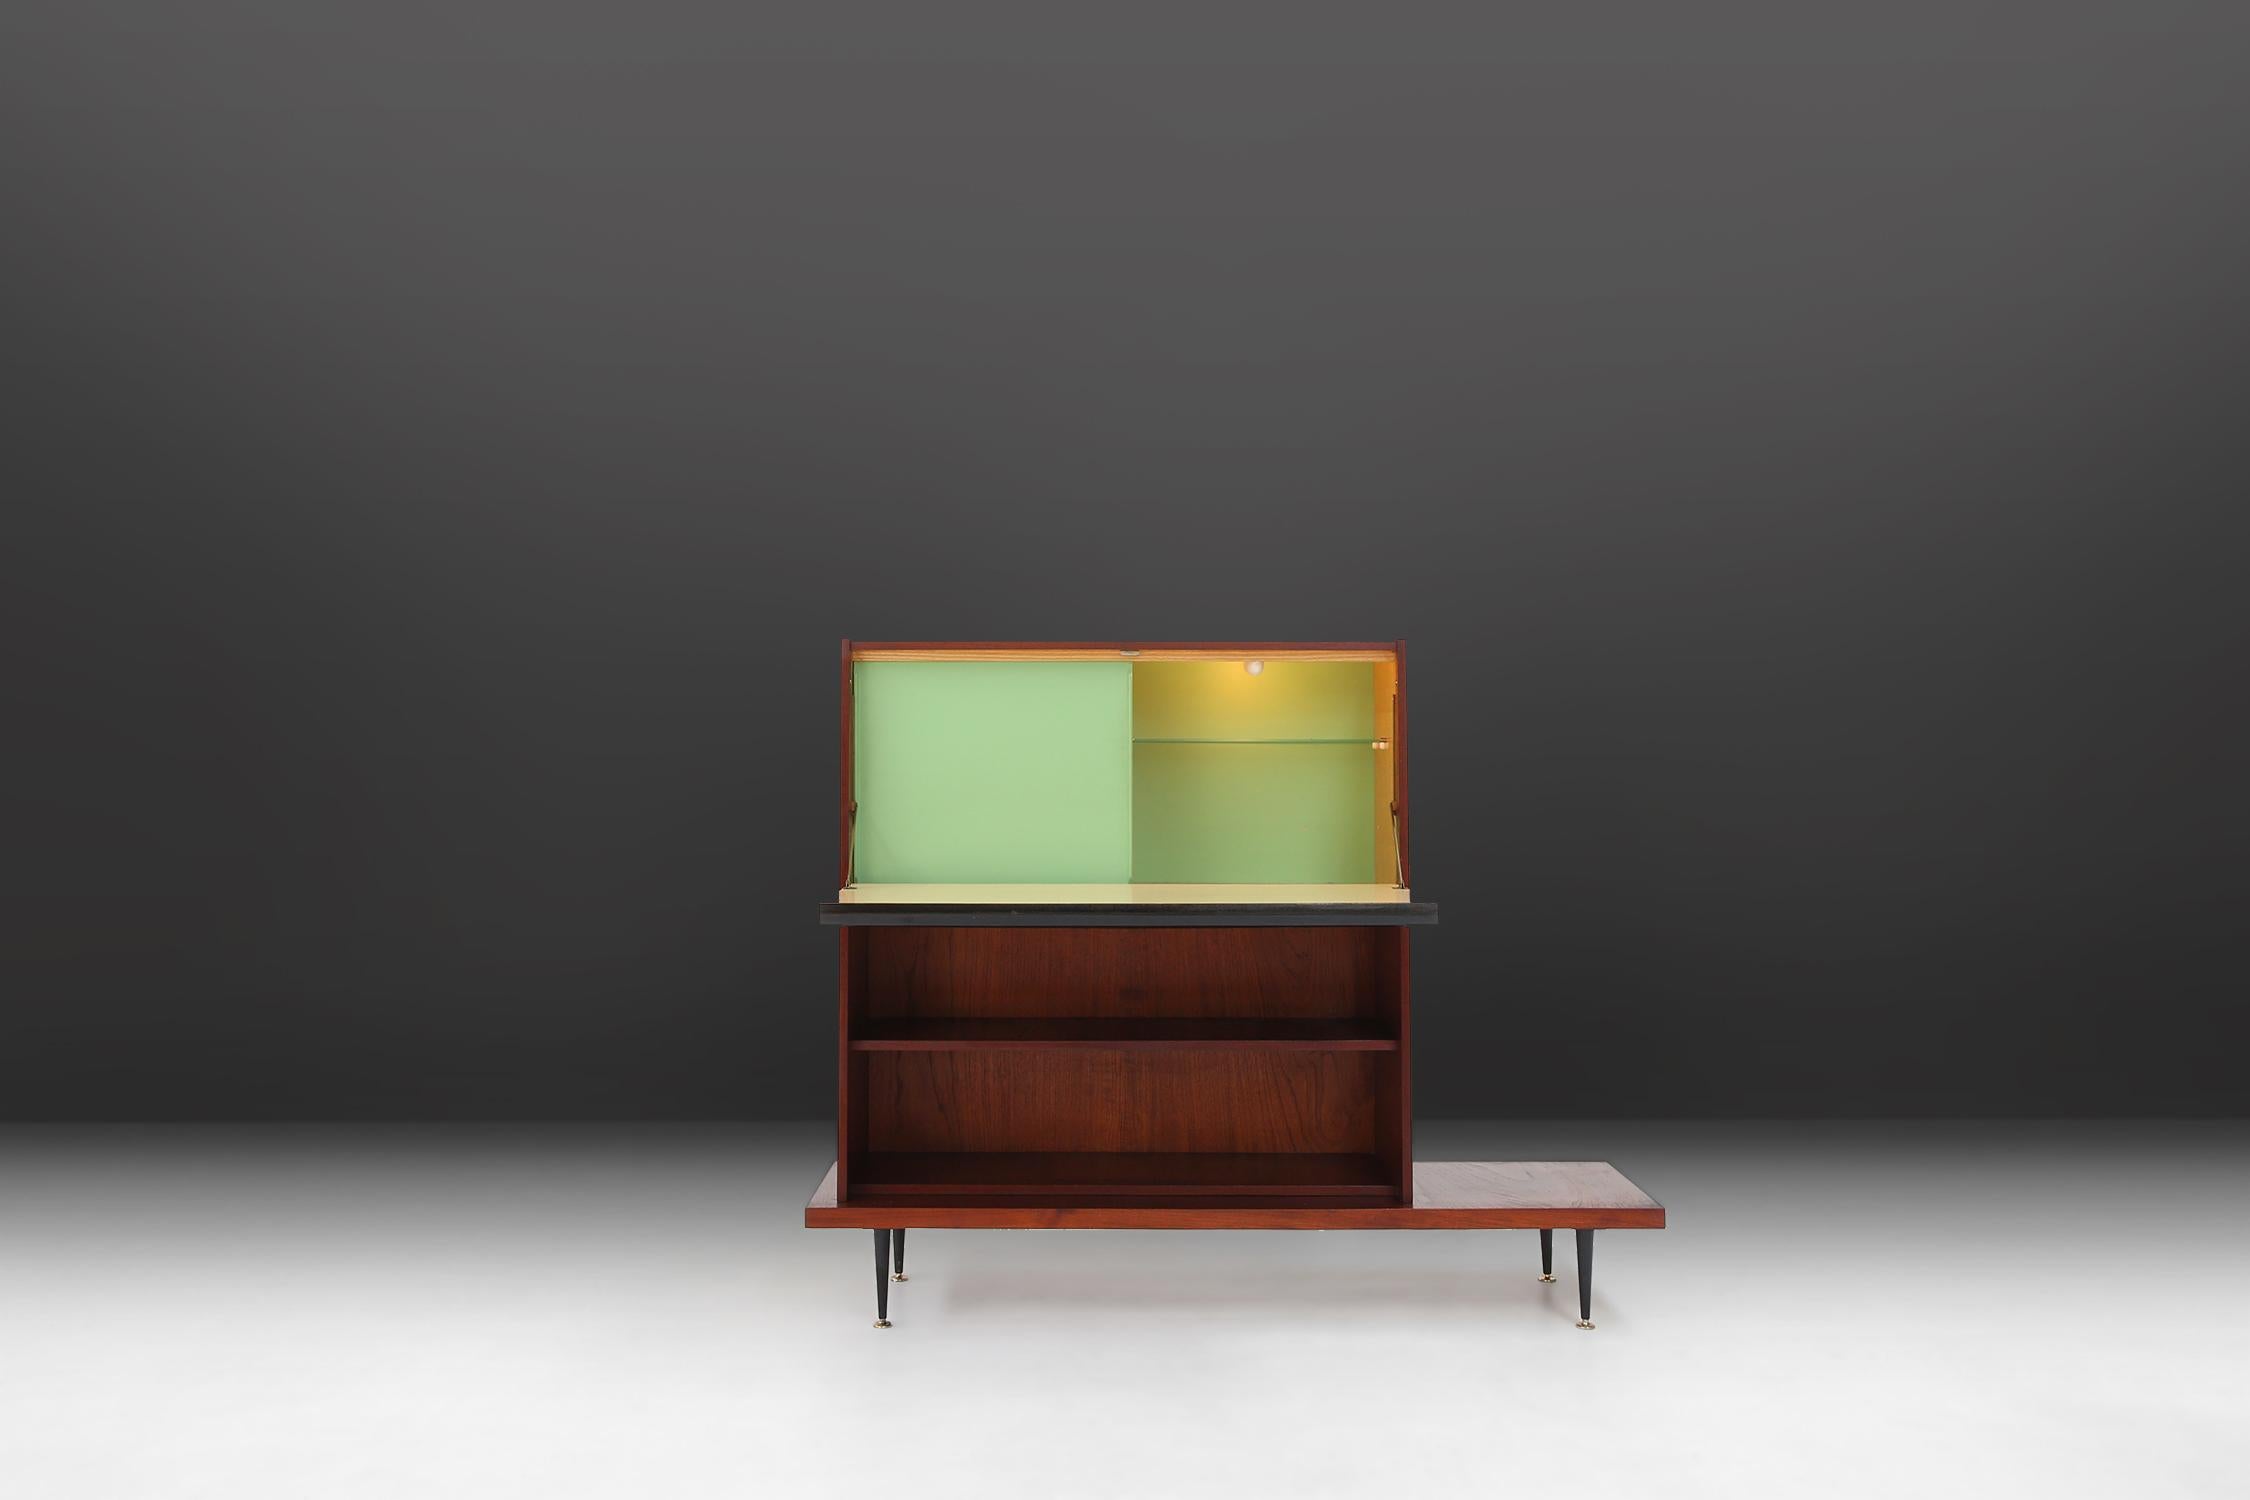 unique midcentury cabinet made in the 1960s of teak wood with some black details in the handle.
If you open the cabinet you find a great refreshing green color for with a light inside.